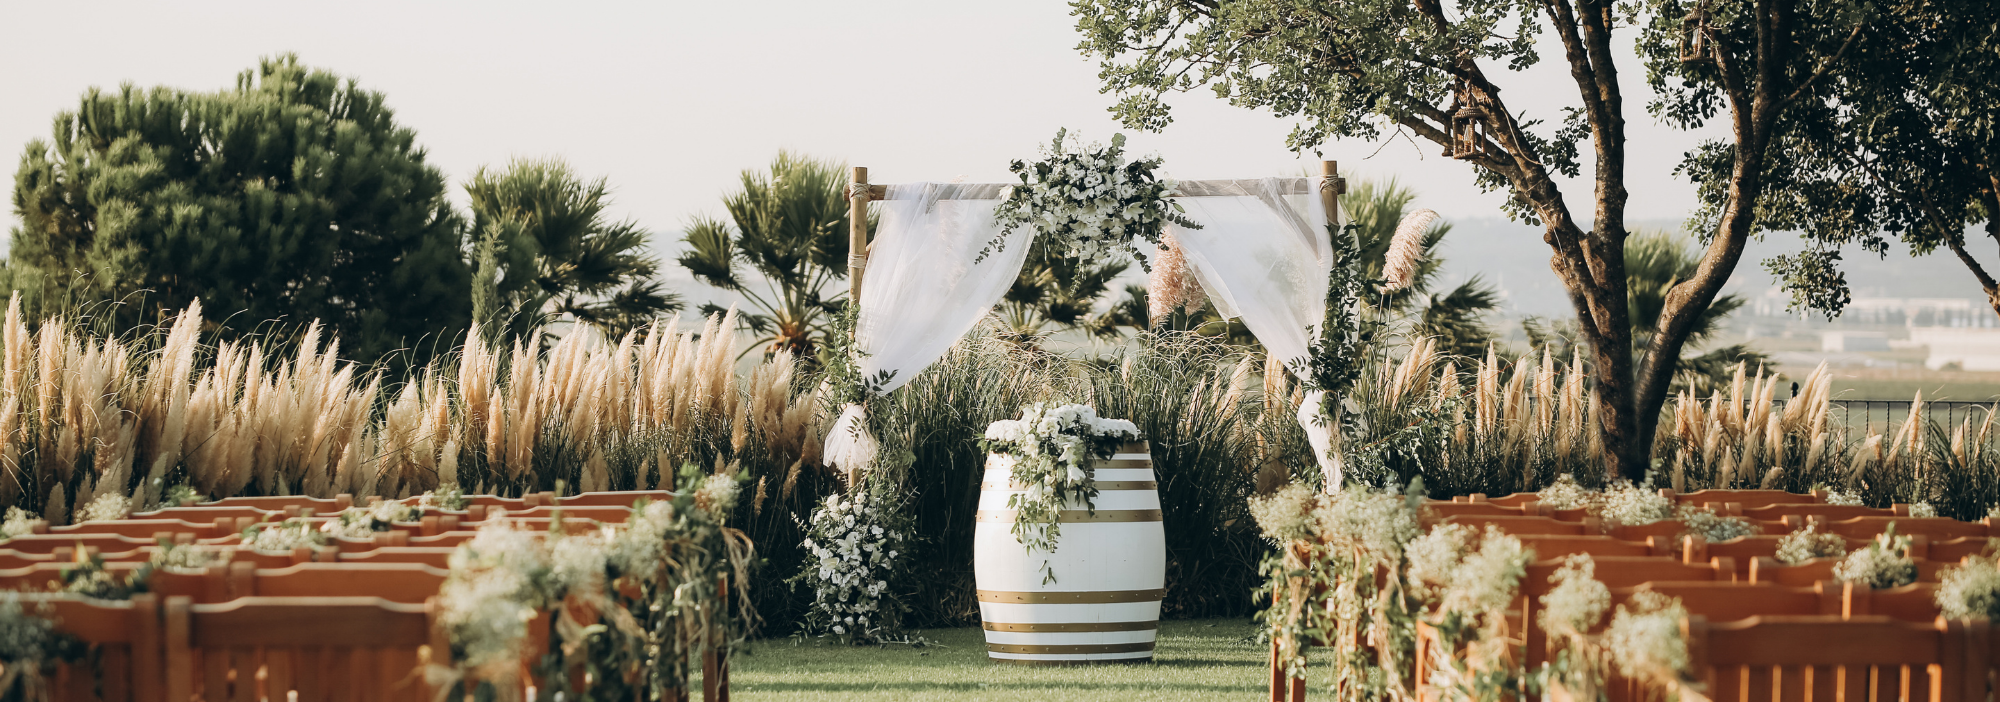 rustic outdoor wedding ceremony with white wash barrels 